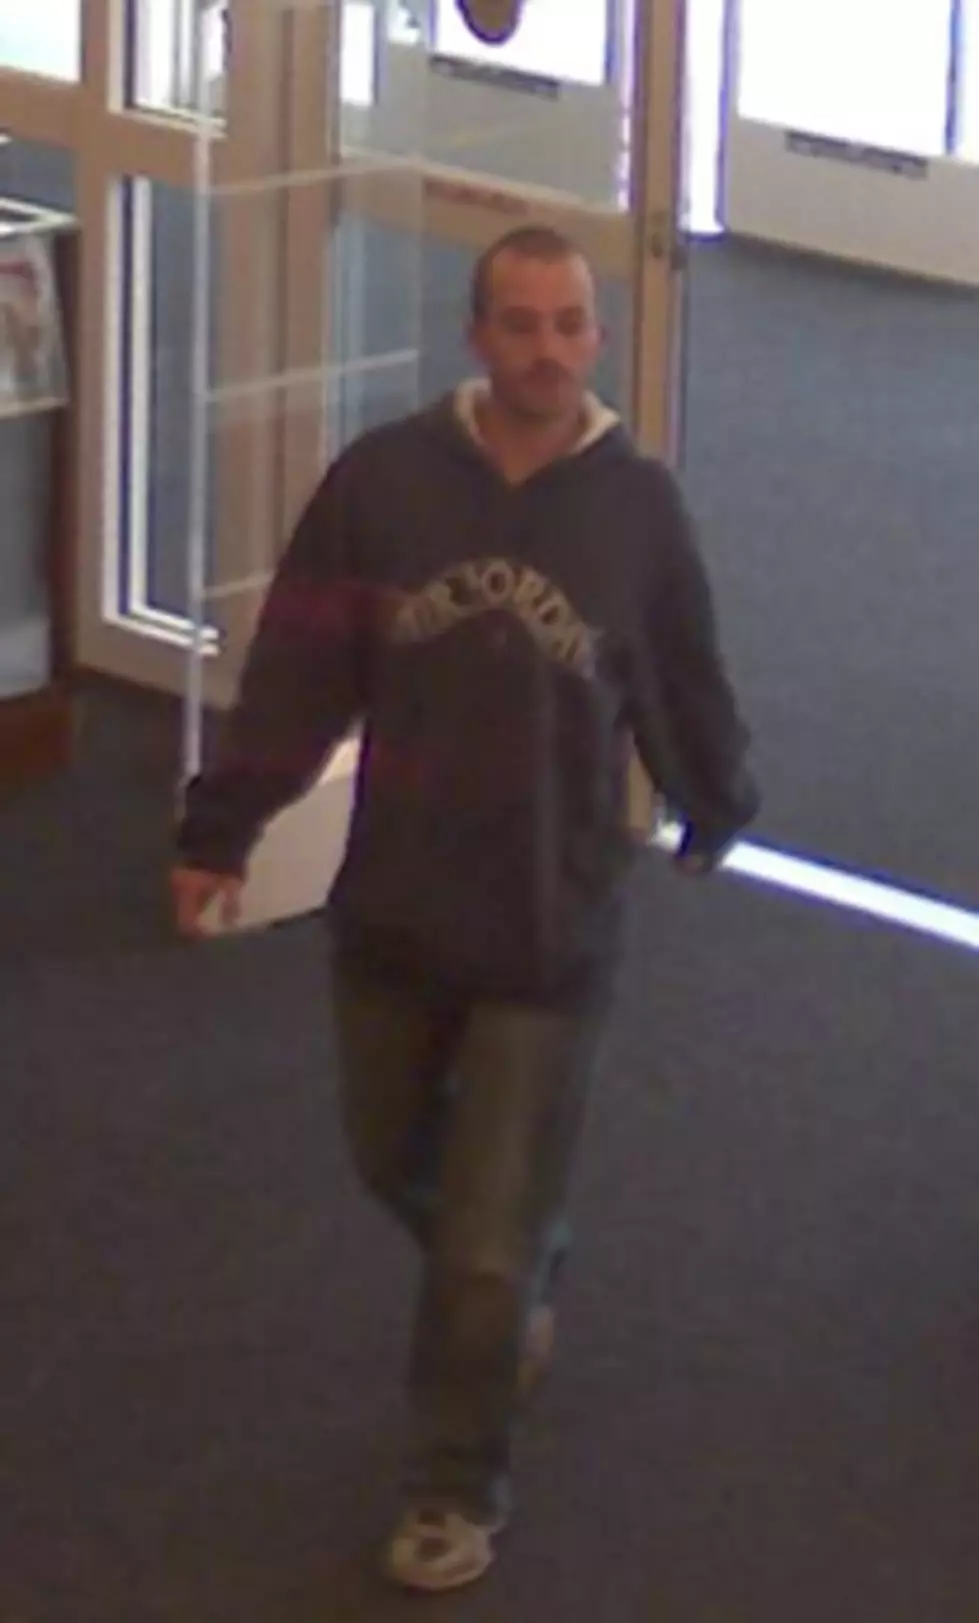 Vehicle Thefts – Click Through For Picture Of Suspect